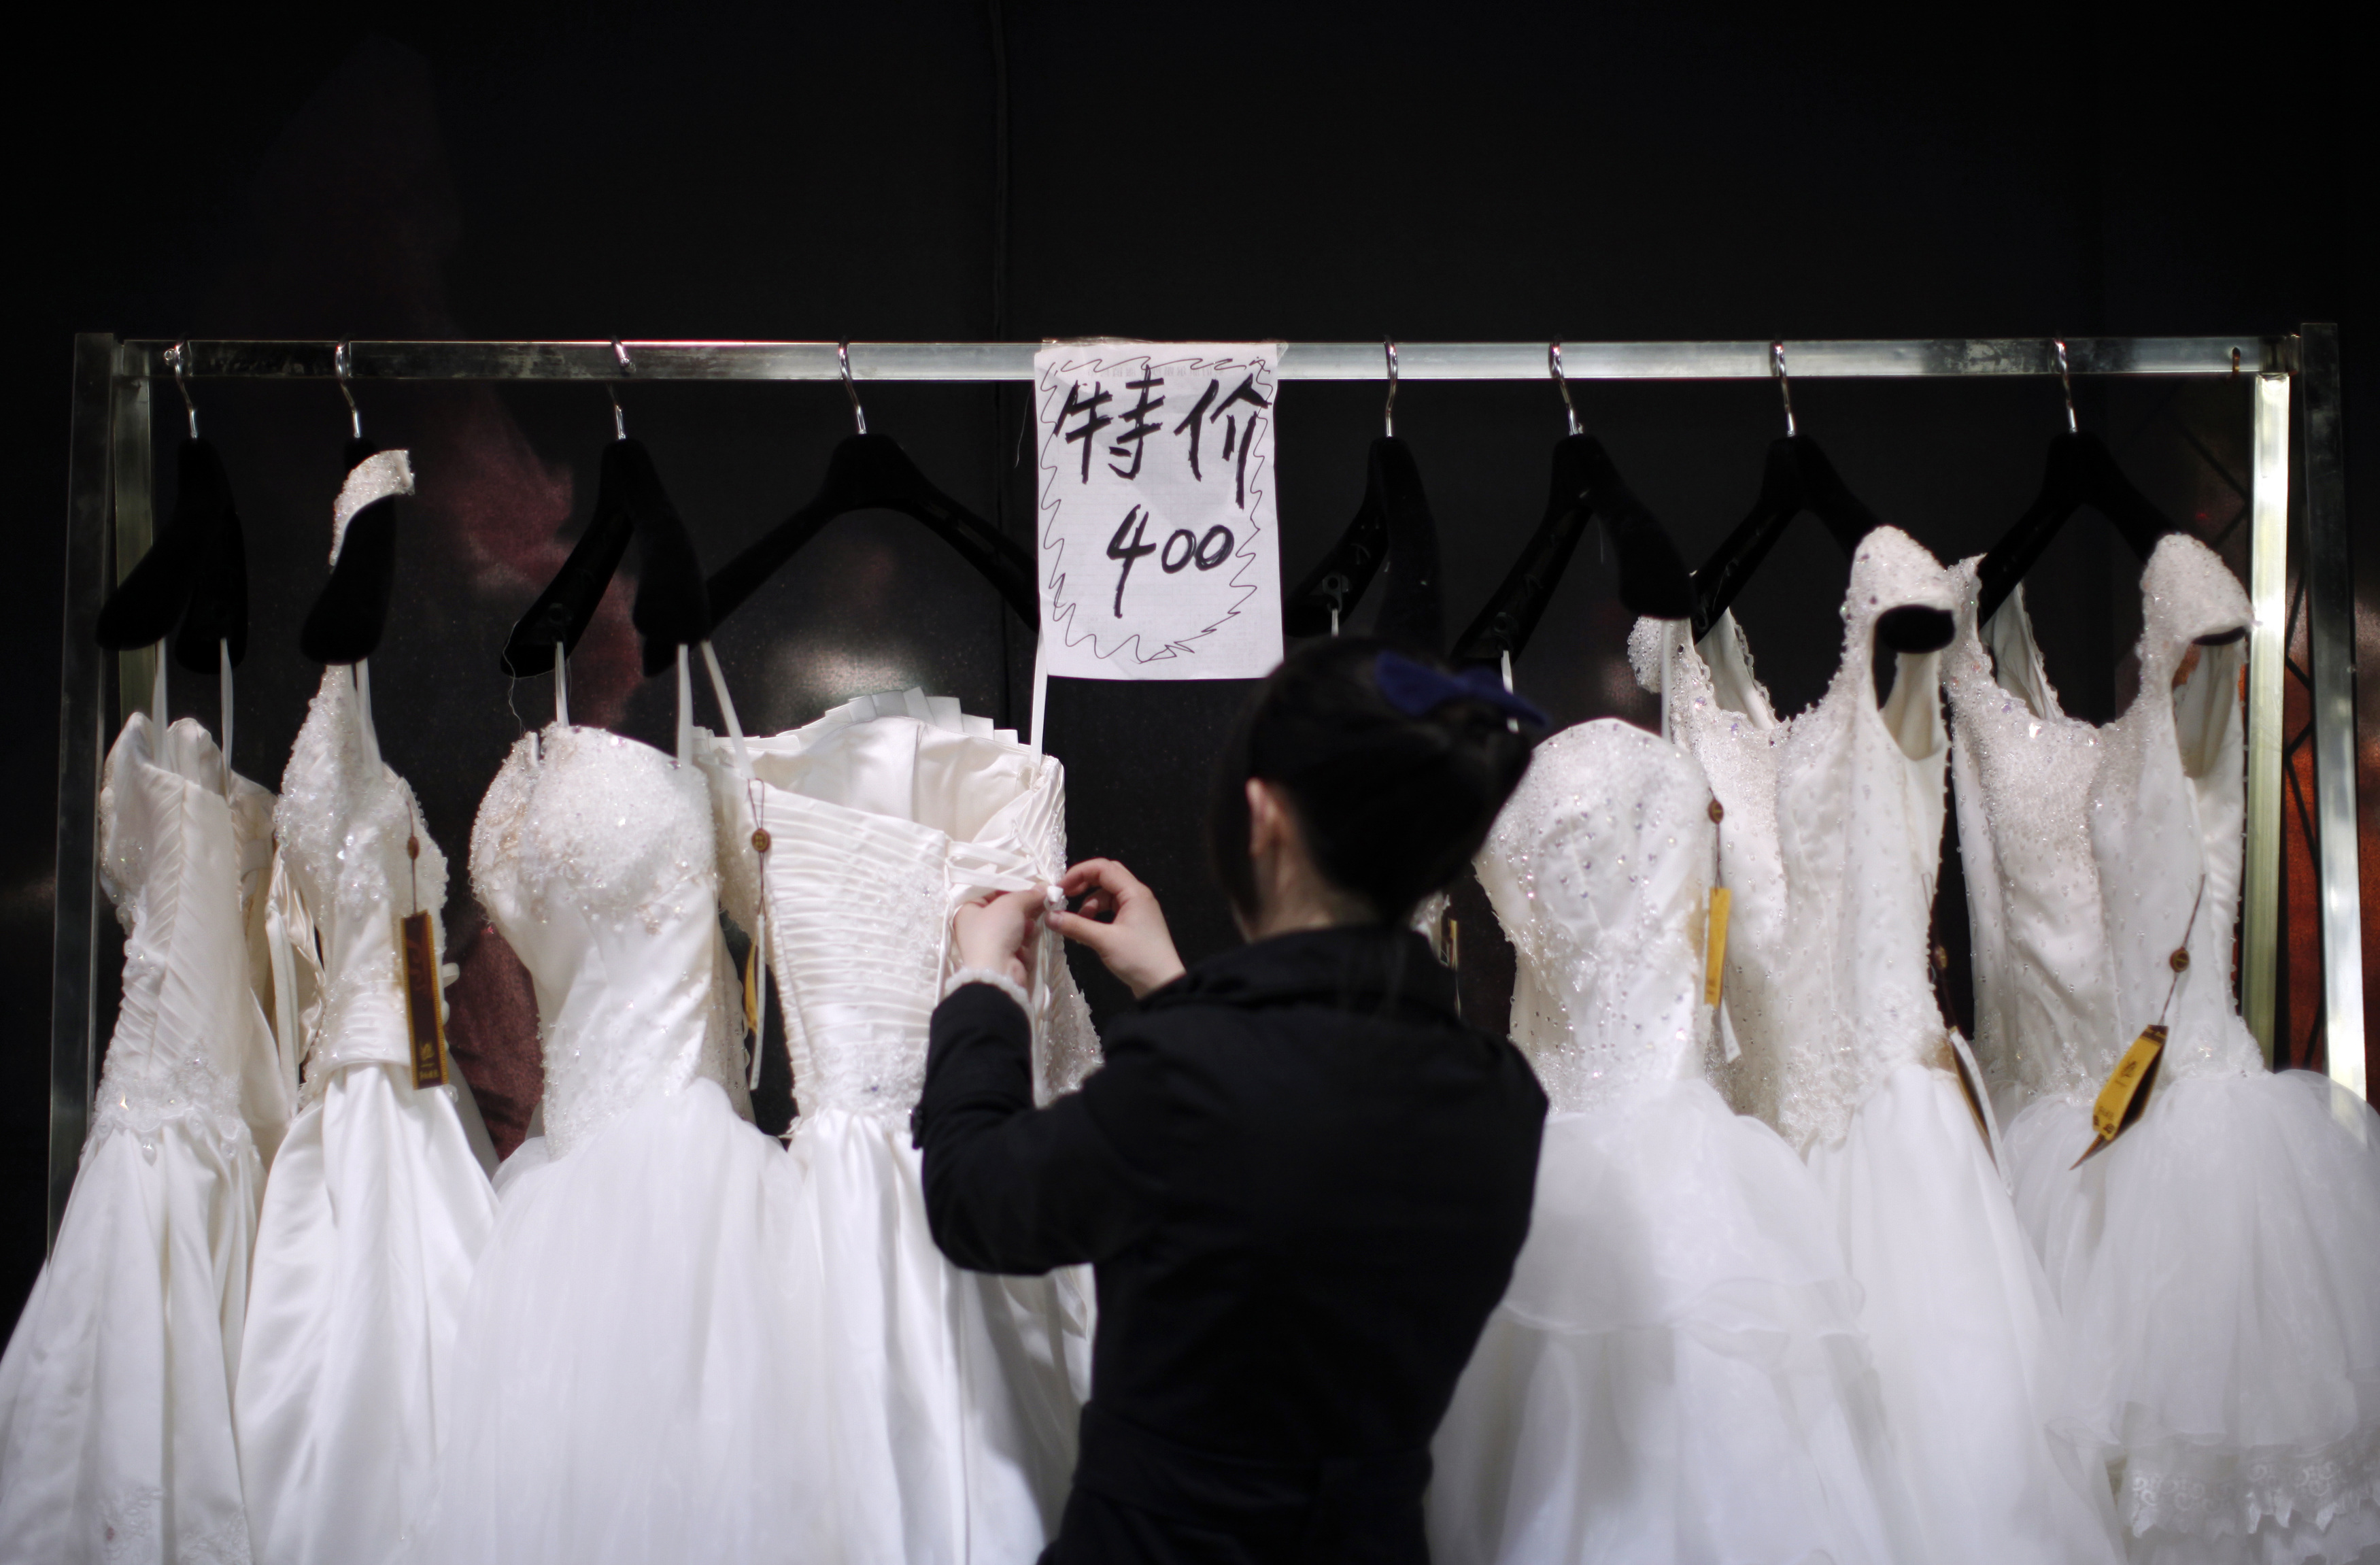 Vendor prepares wedding dresses at a show room during the China International Wedding Expo in Shanghai